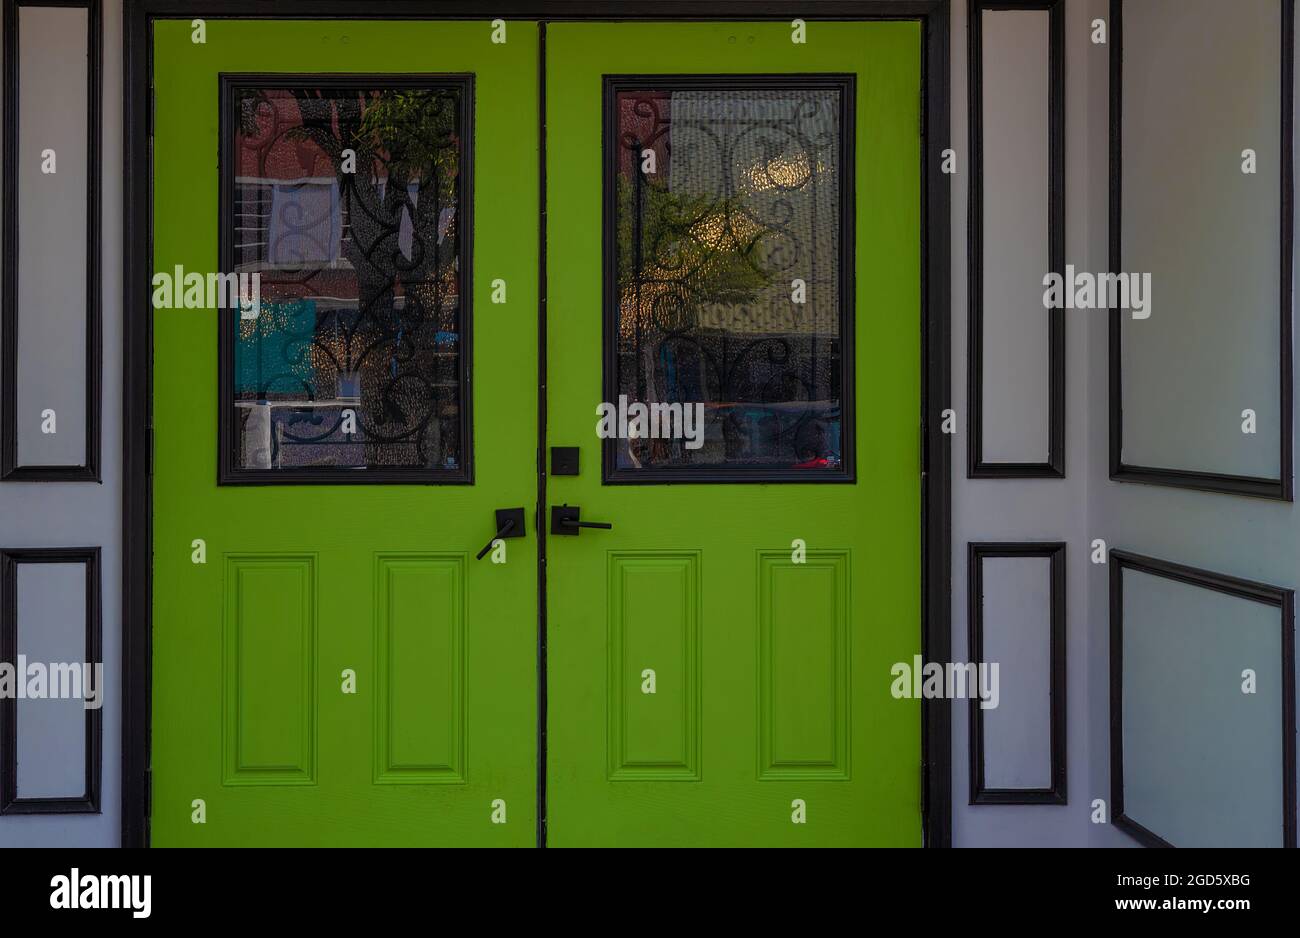 Lime green doors and white exterior wall with black trim draw the eye to the entrance to this building Stock Photo